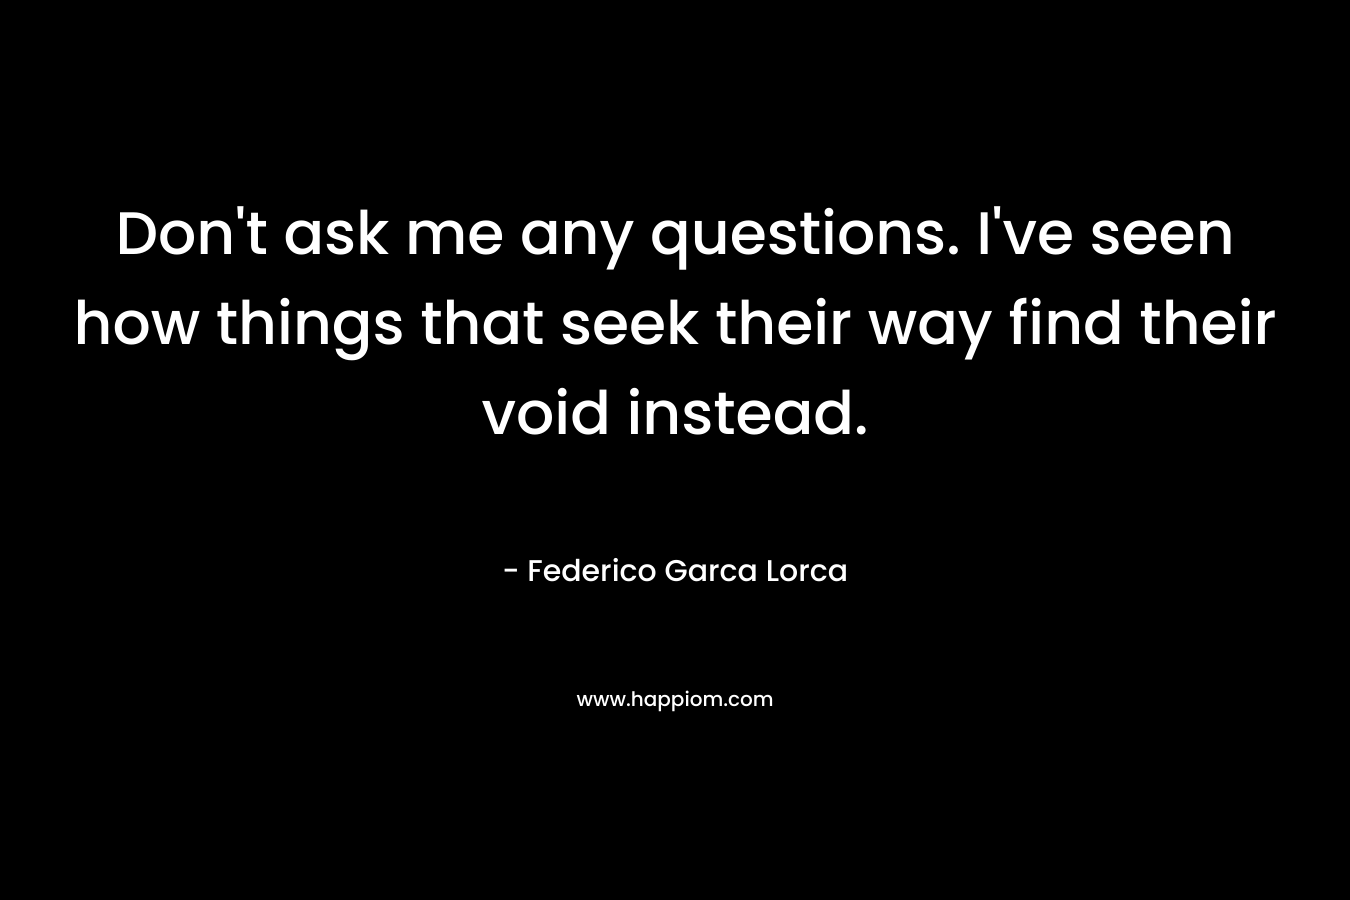 Don't ask me any questions. I've seen how things that seek their way find their void instead.